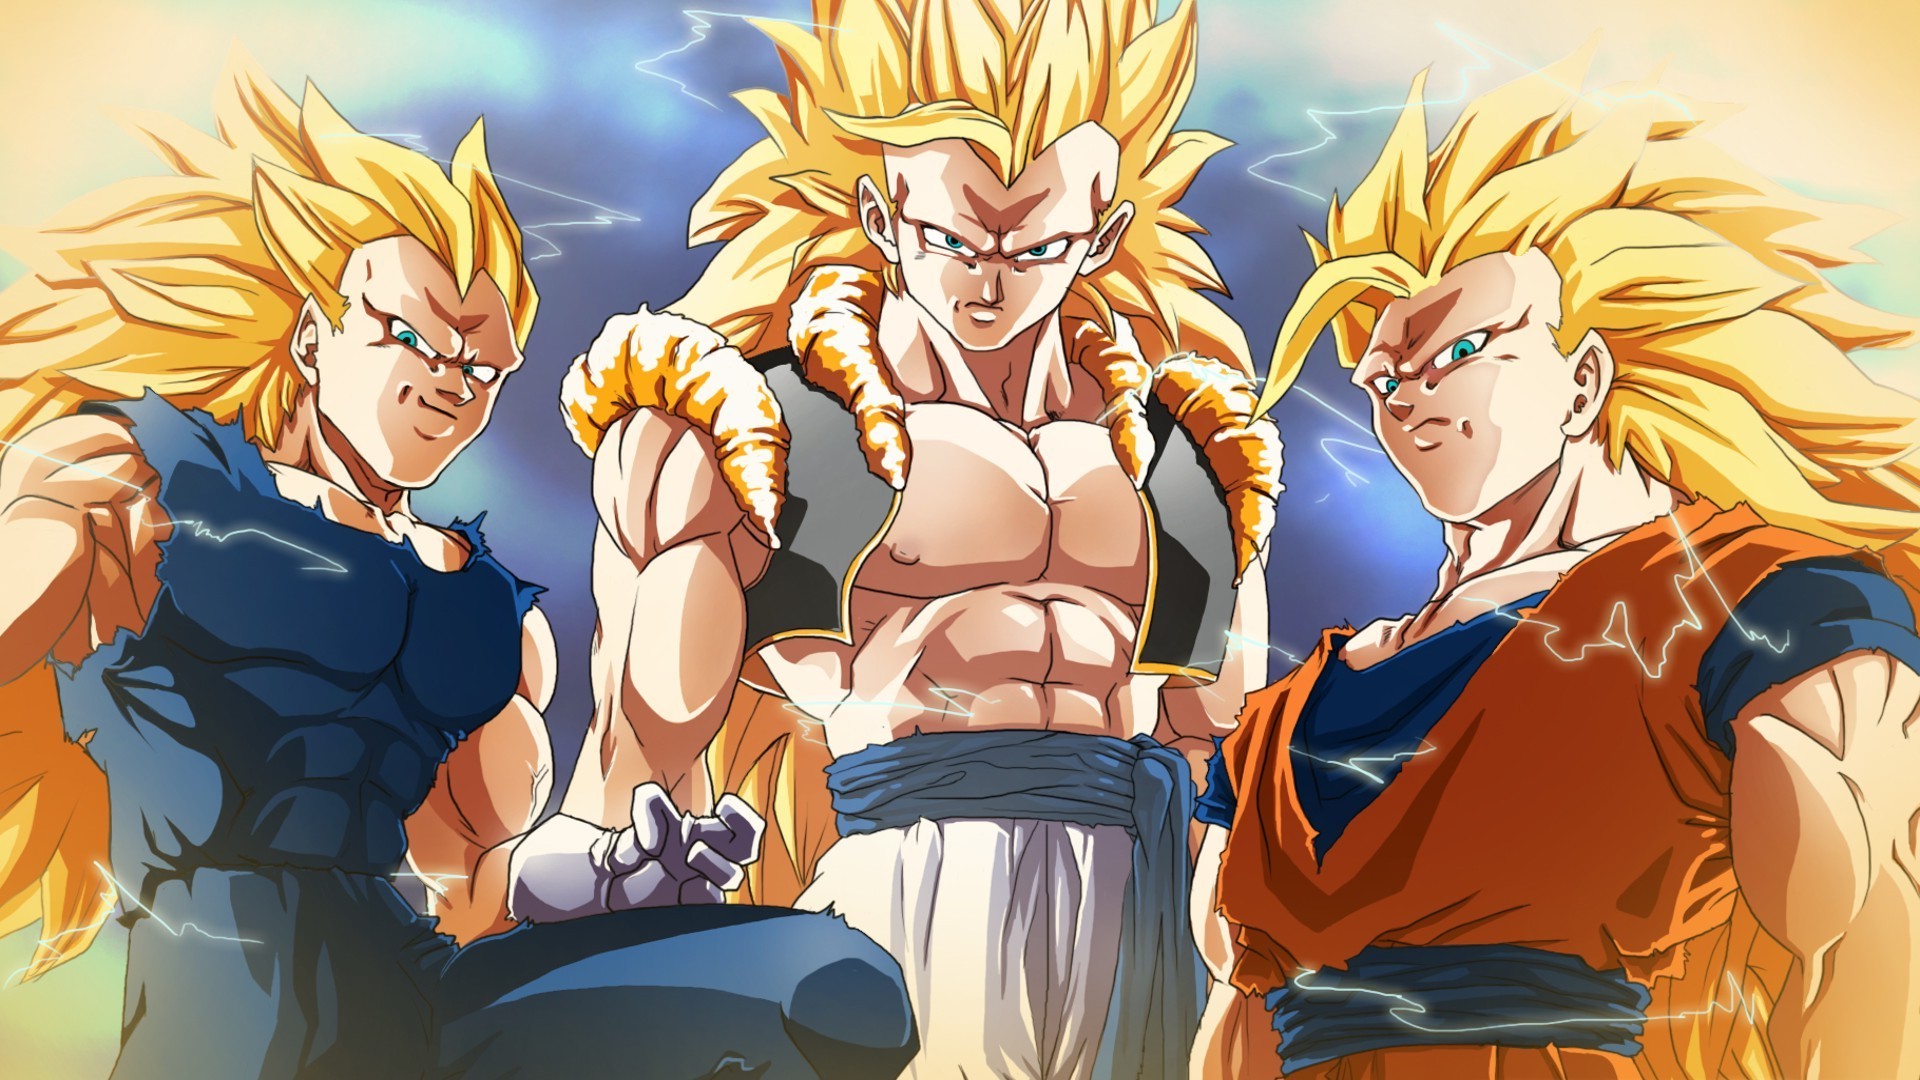 Wallpaper HD Goku SSJ3 With Resolution 1920X1080 pixel. You can make this wallpaper for your Desktop Computer Backgrounds, Mac Wallpapers, Android Lock screen or iPhone Screensavers